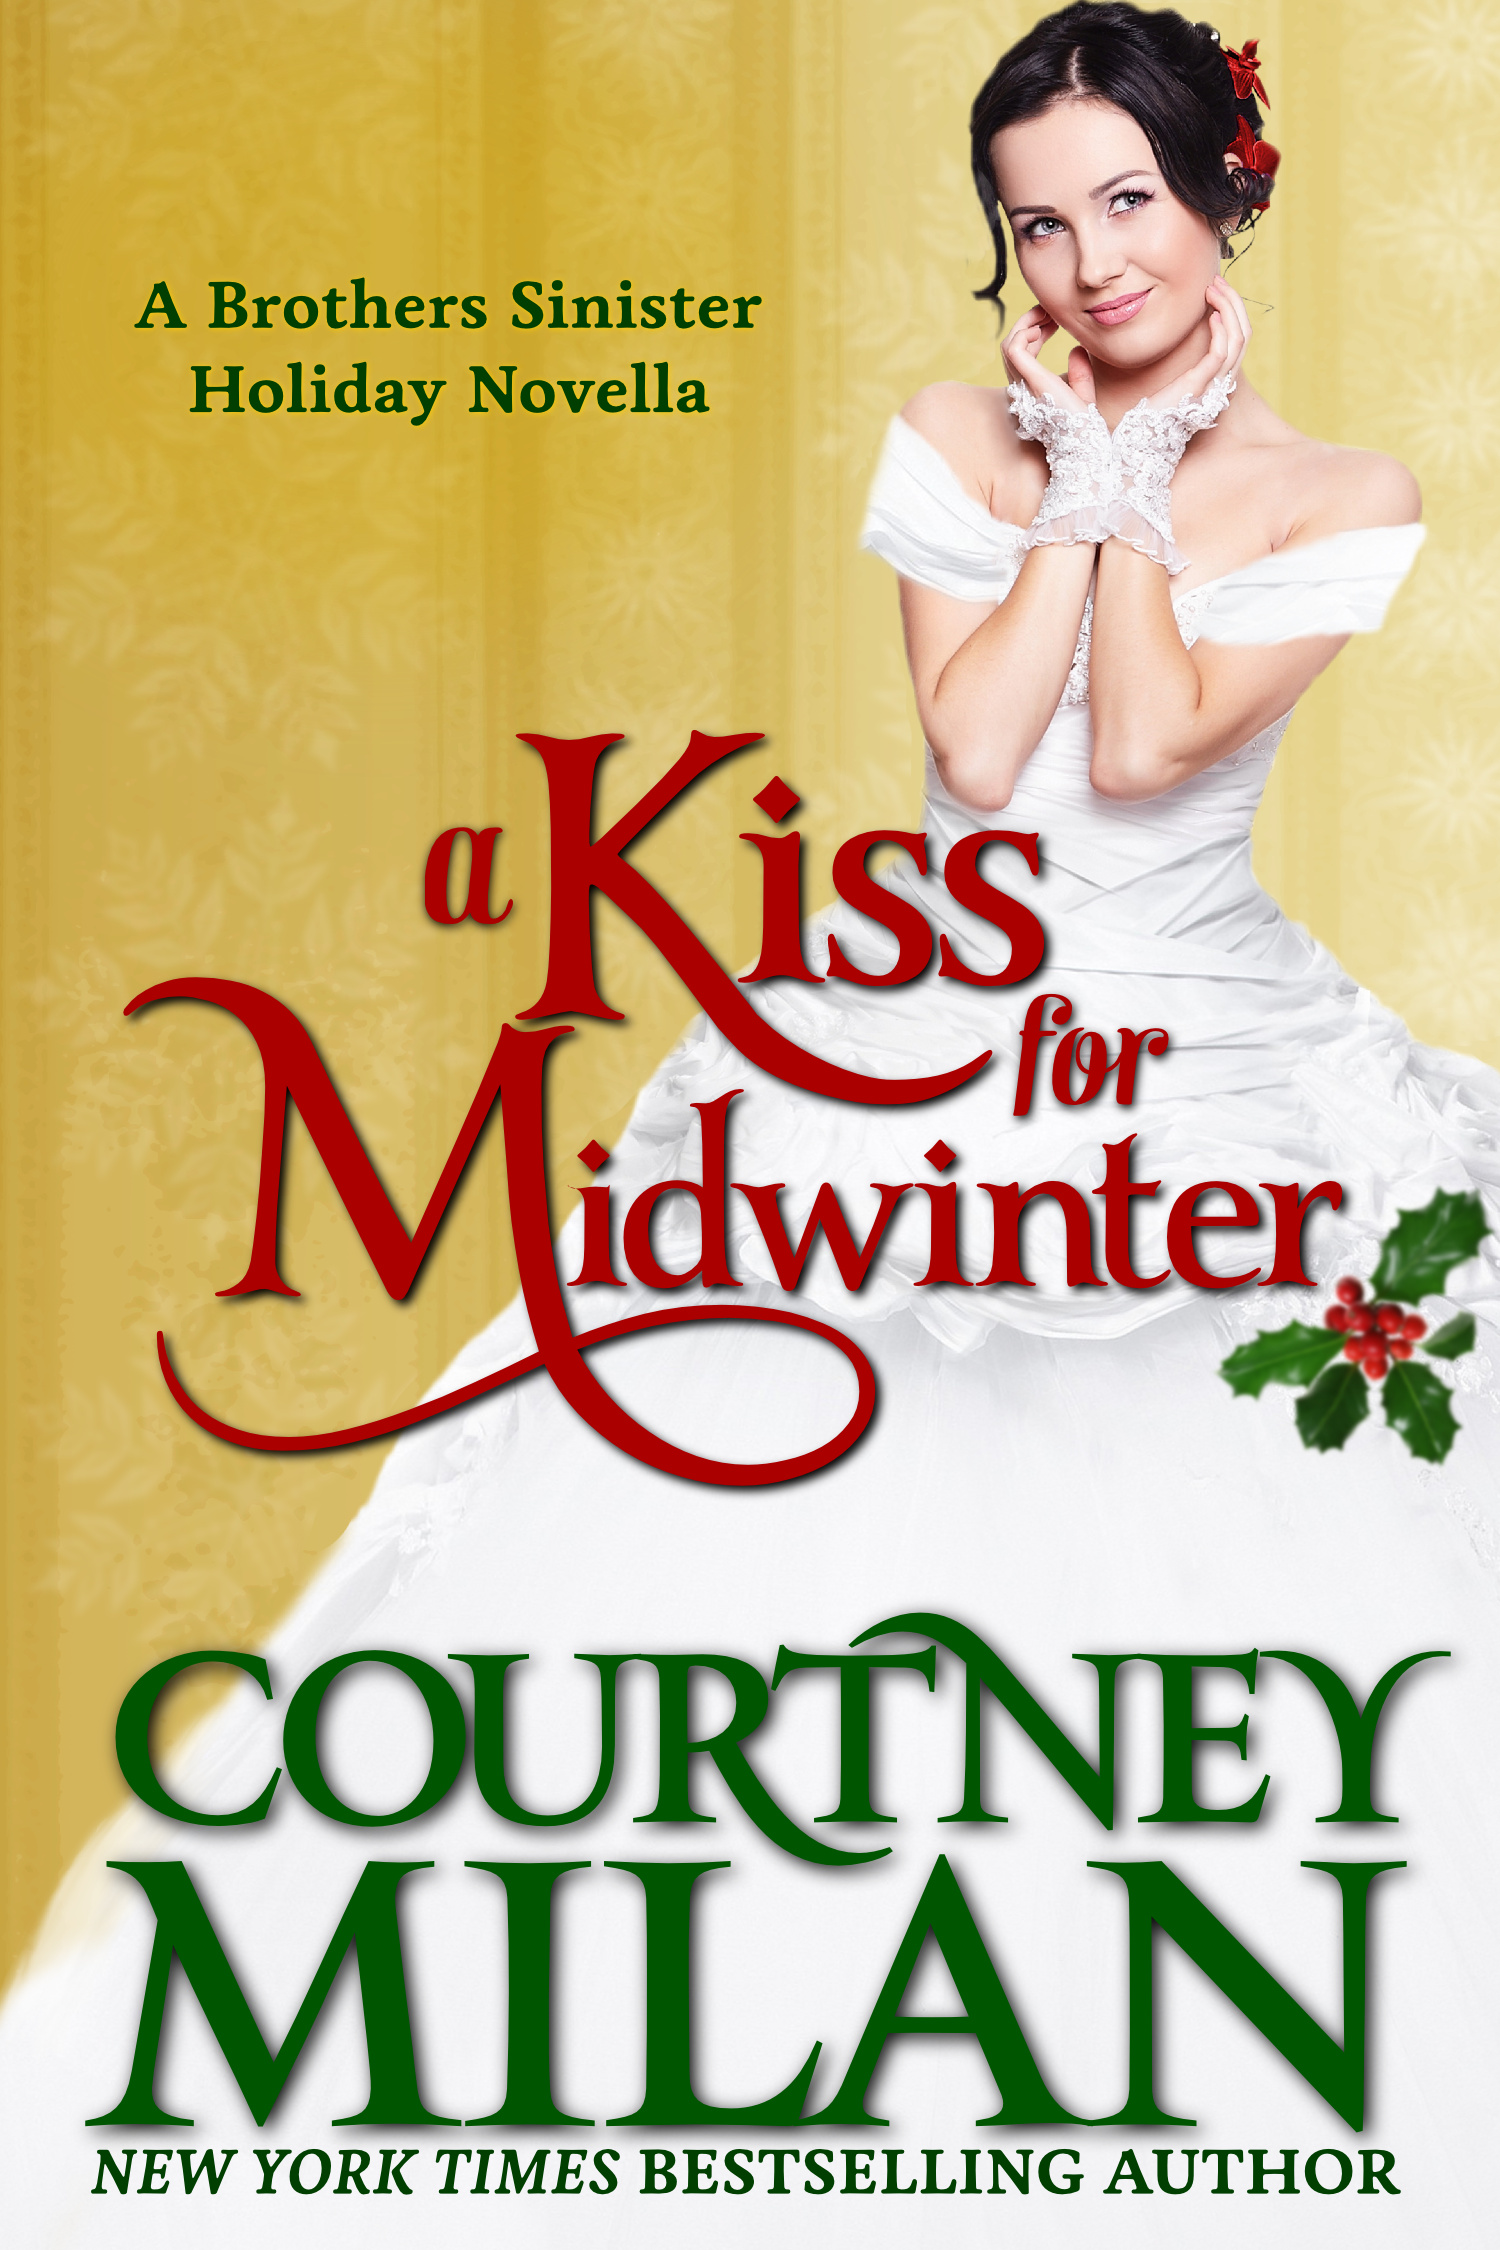 A-Kiss-for-Midwinter